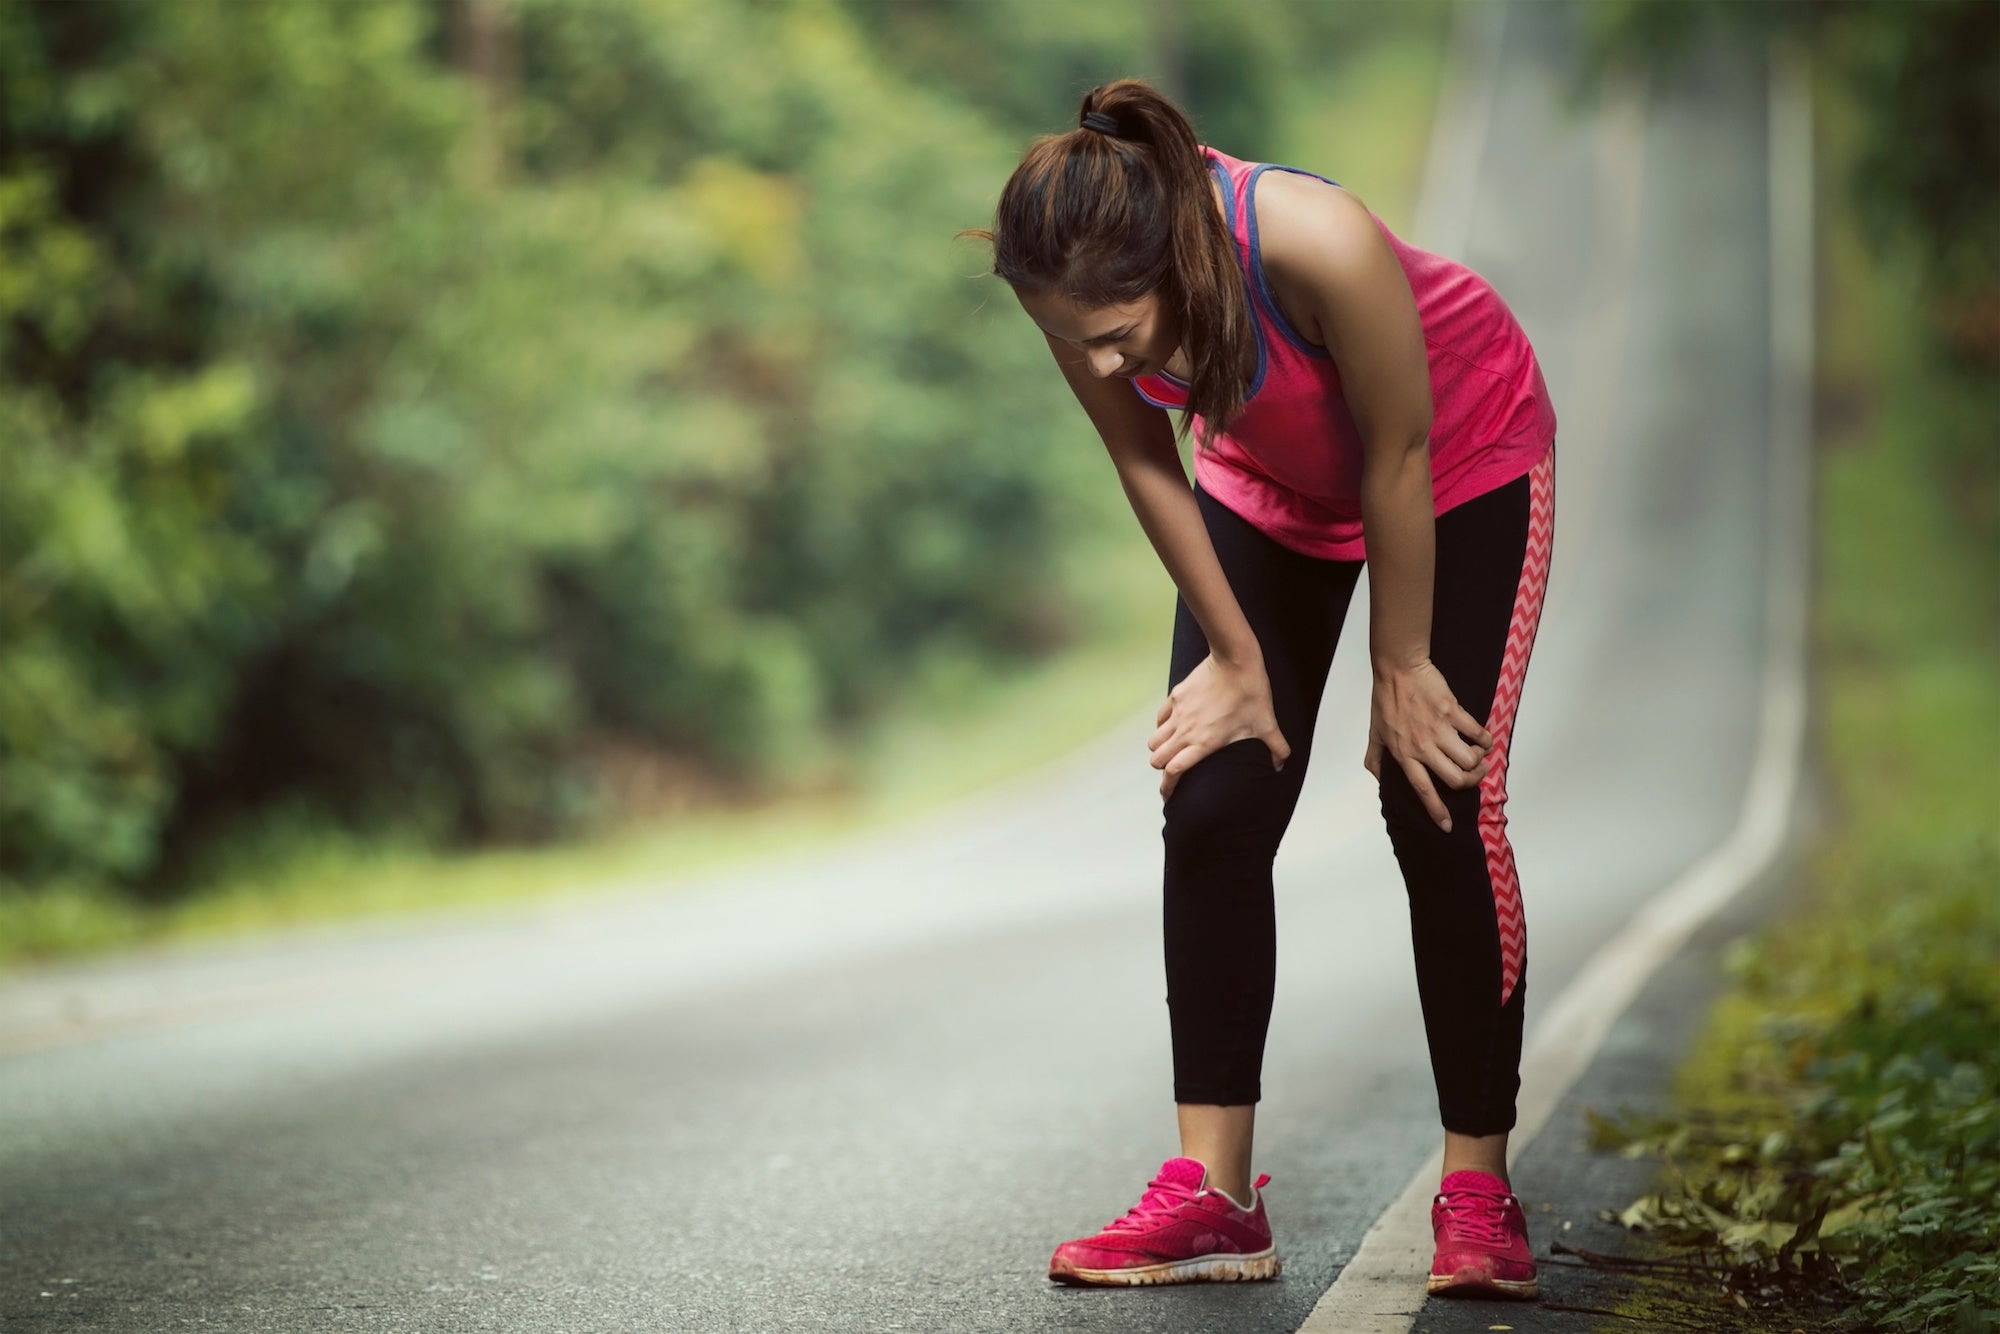 New to Running & Back Pain? 10 Things You’ll Wish You Knew